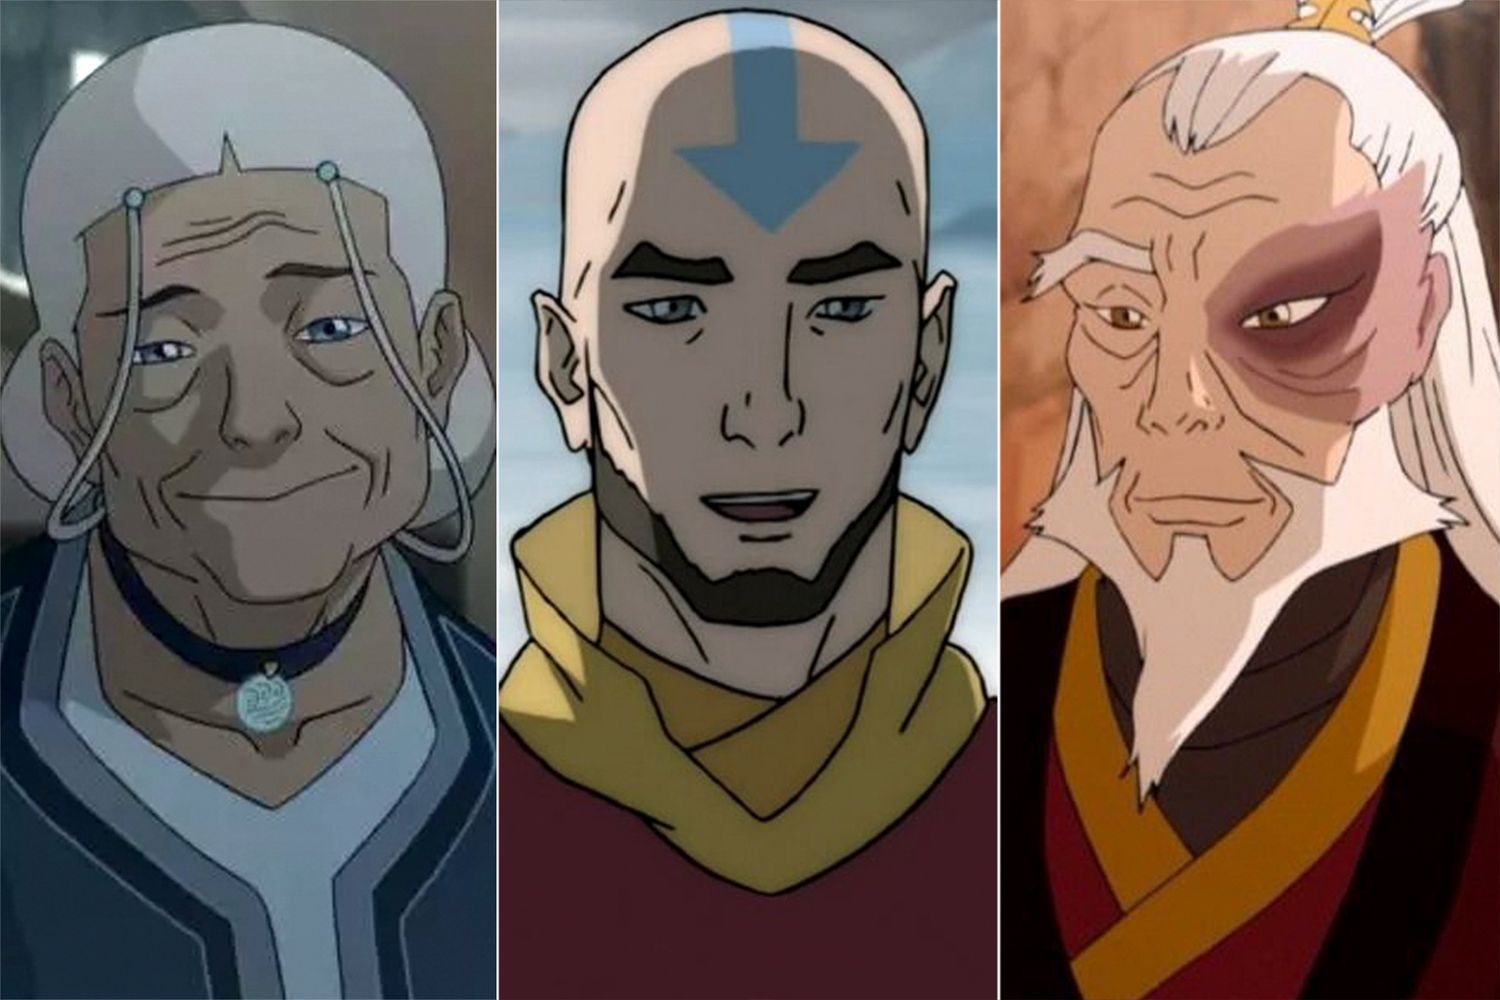 Next Avatar Animated Series After Korra Officially Confirmed